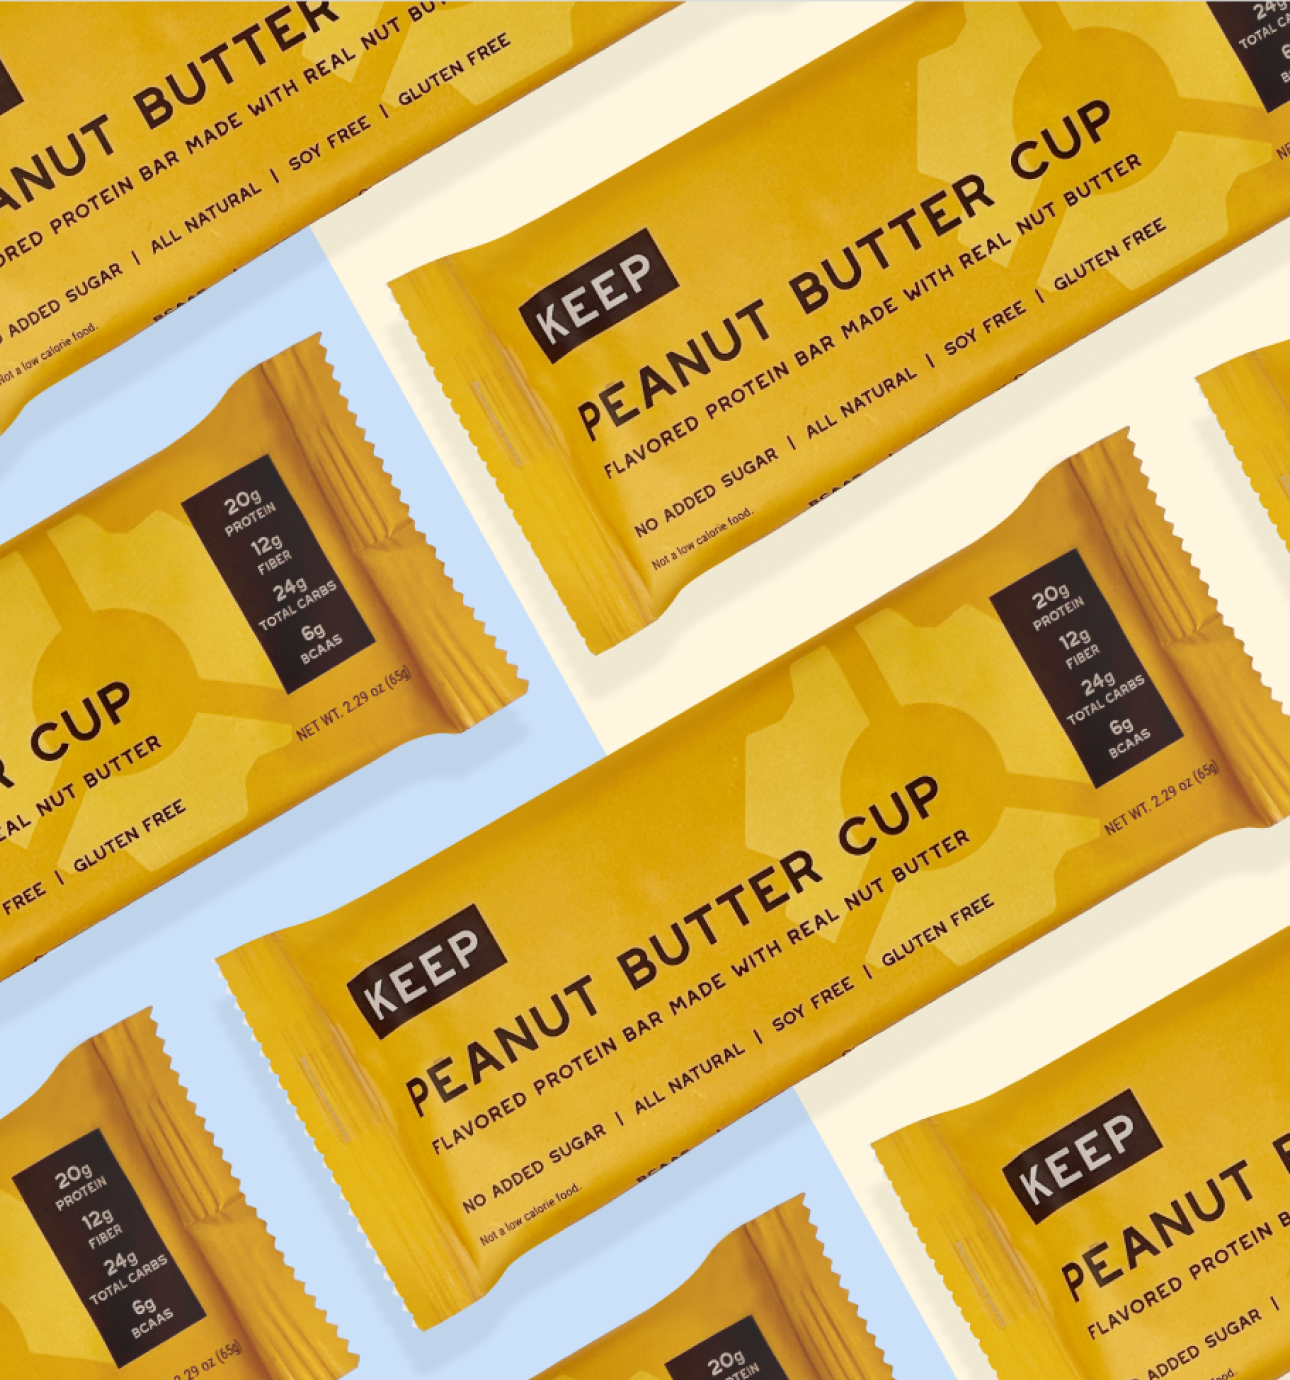 Close up keep peanut butter cup, multiple products